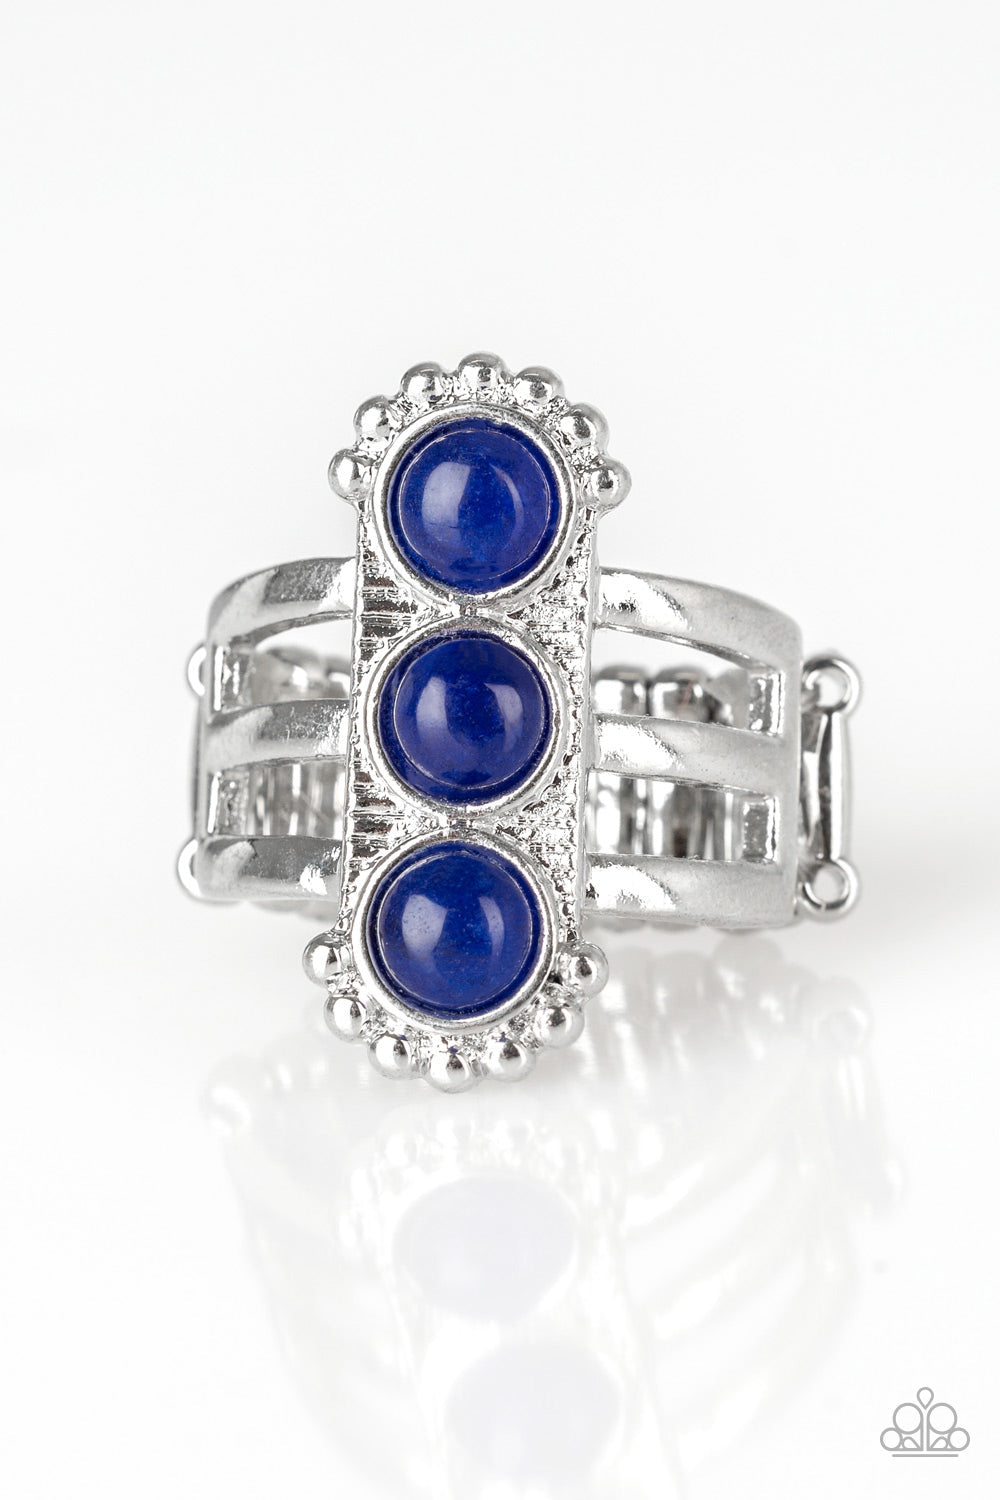 Rio Trio - Blue and Silver Fashion Ring - Paparazzi Accessories - Infused with glassy blue beads, a studded silver frame is pressed into the center of a layered silver band for a seasonal look. Features a stretchy band for a flexible fit. Sold as one individual ring.